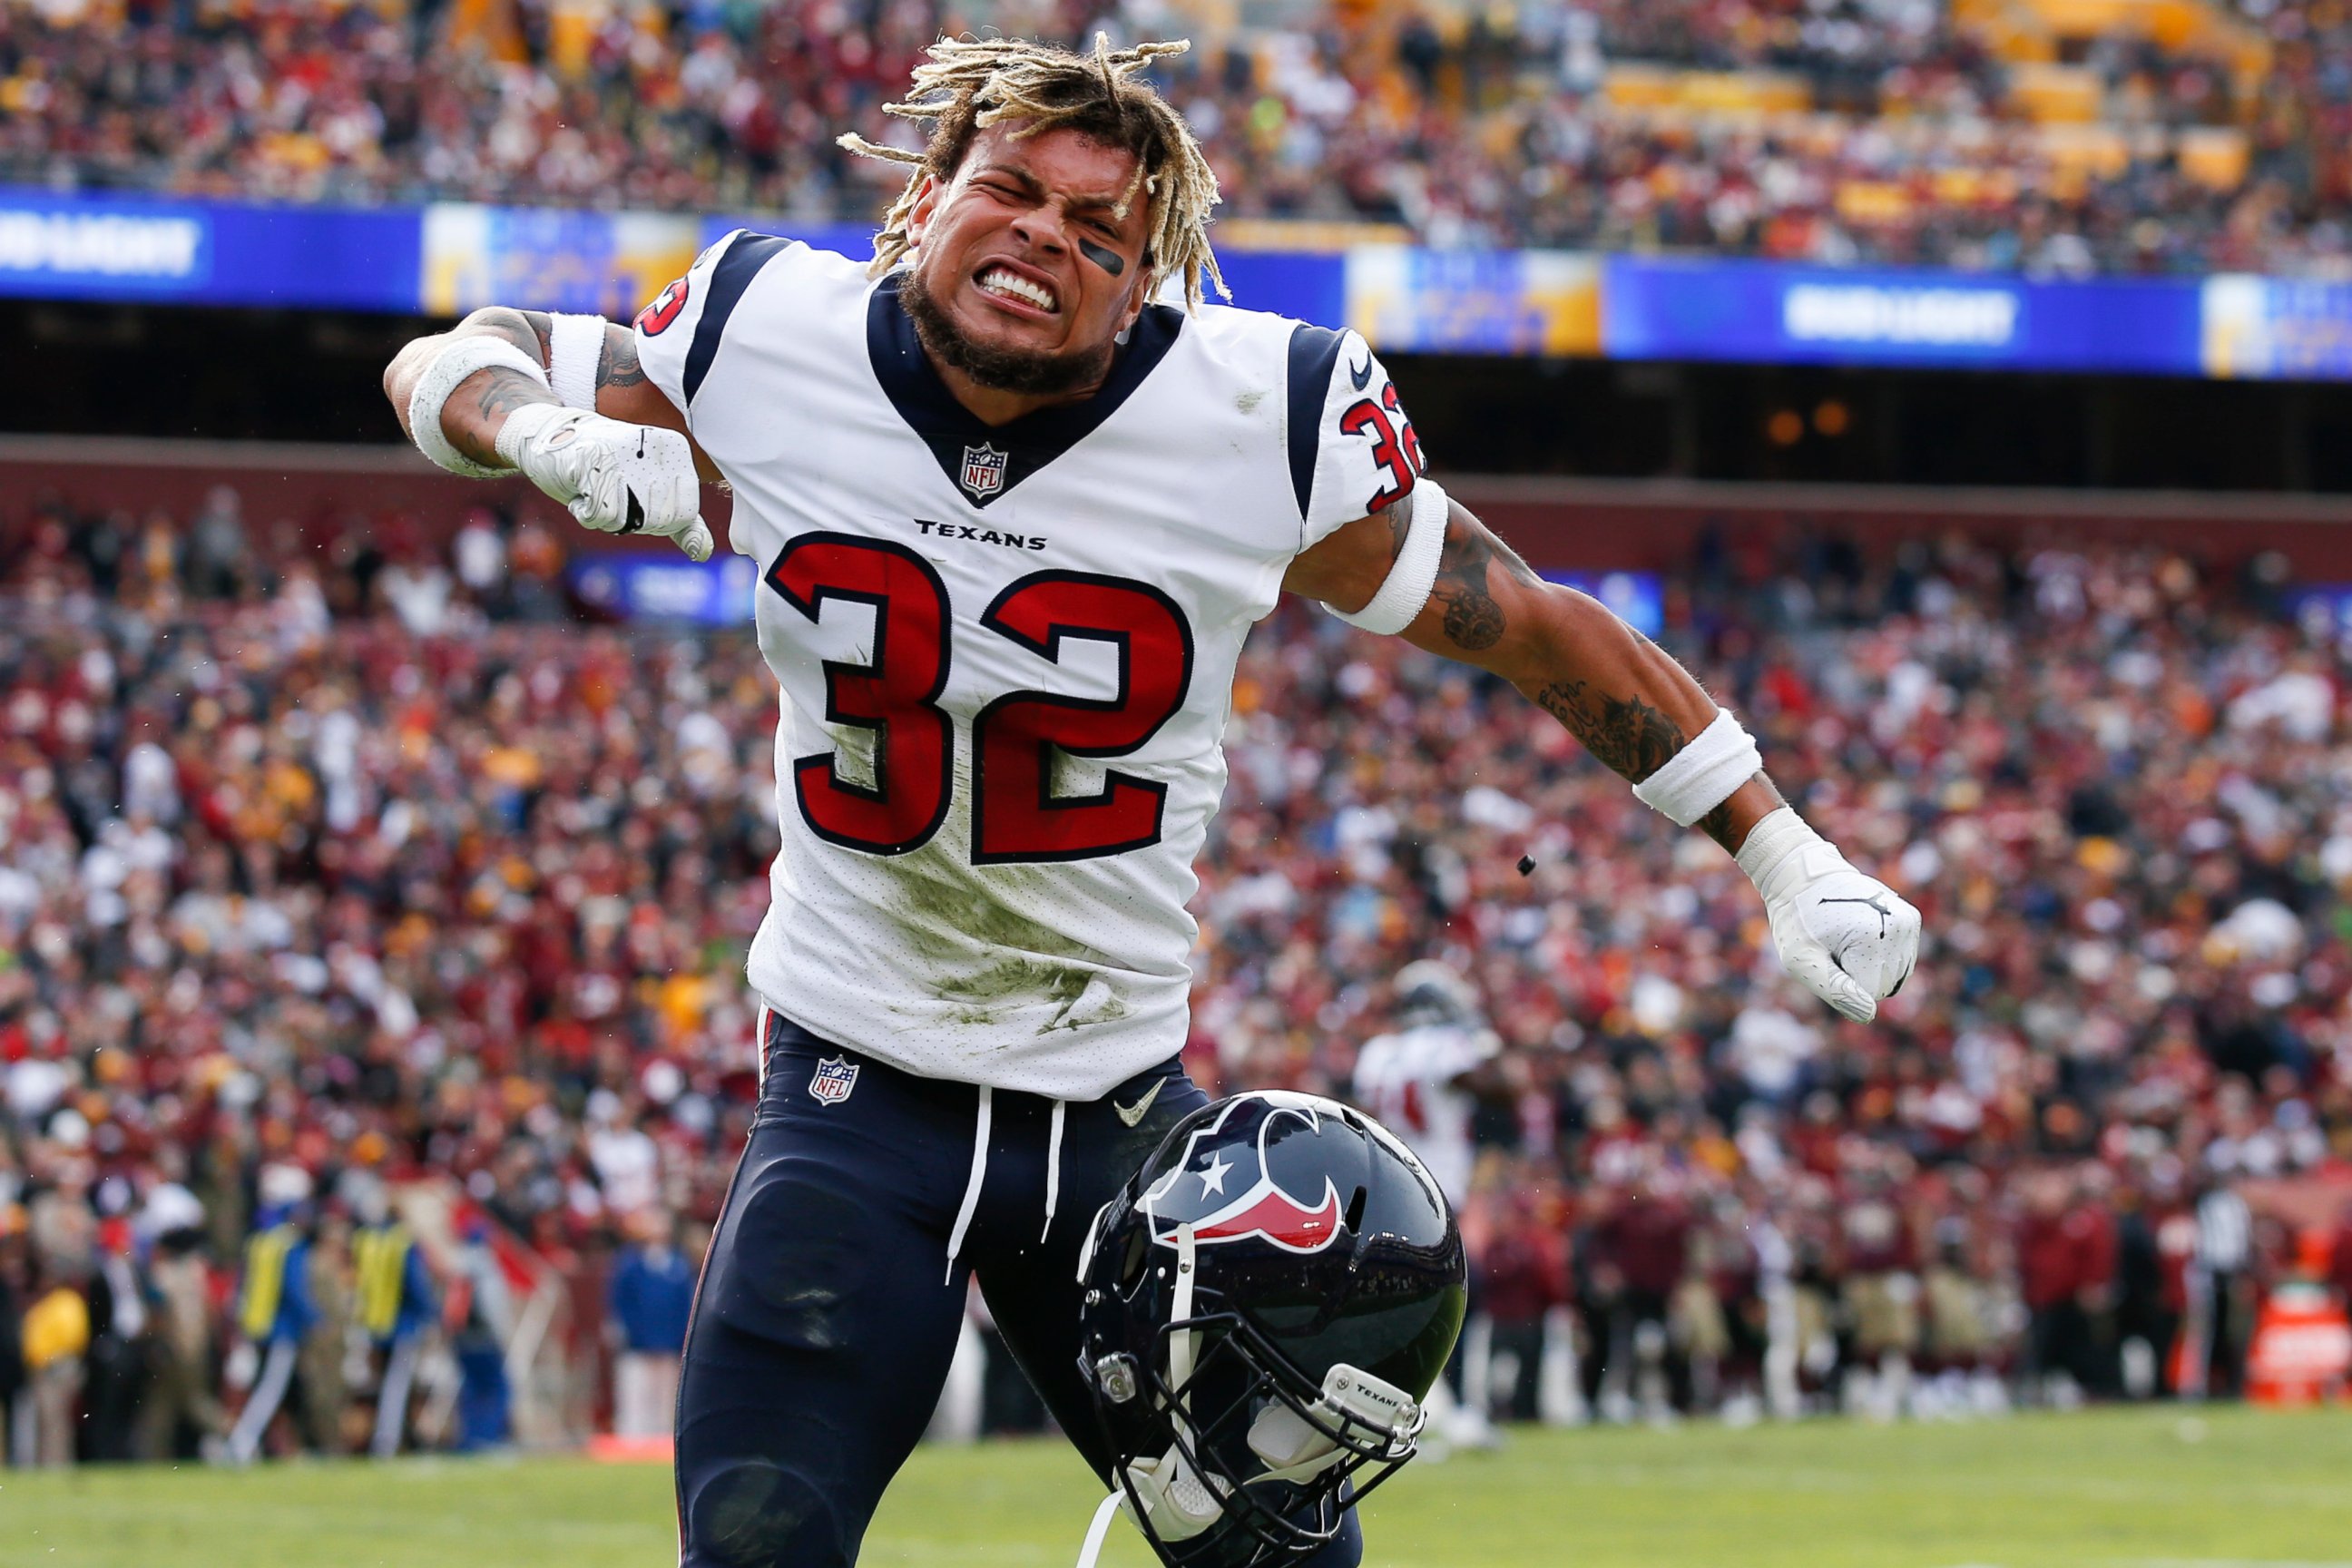 PHOTO: In this Nov. 18, 2018, file photo, Houston Texans free safety Tyrann Mathieu (32) celebrates strong safety Justin Reid's interception and touchdown during the first half of an NFL football game against the Washington Redskins in Landover, Md.